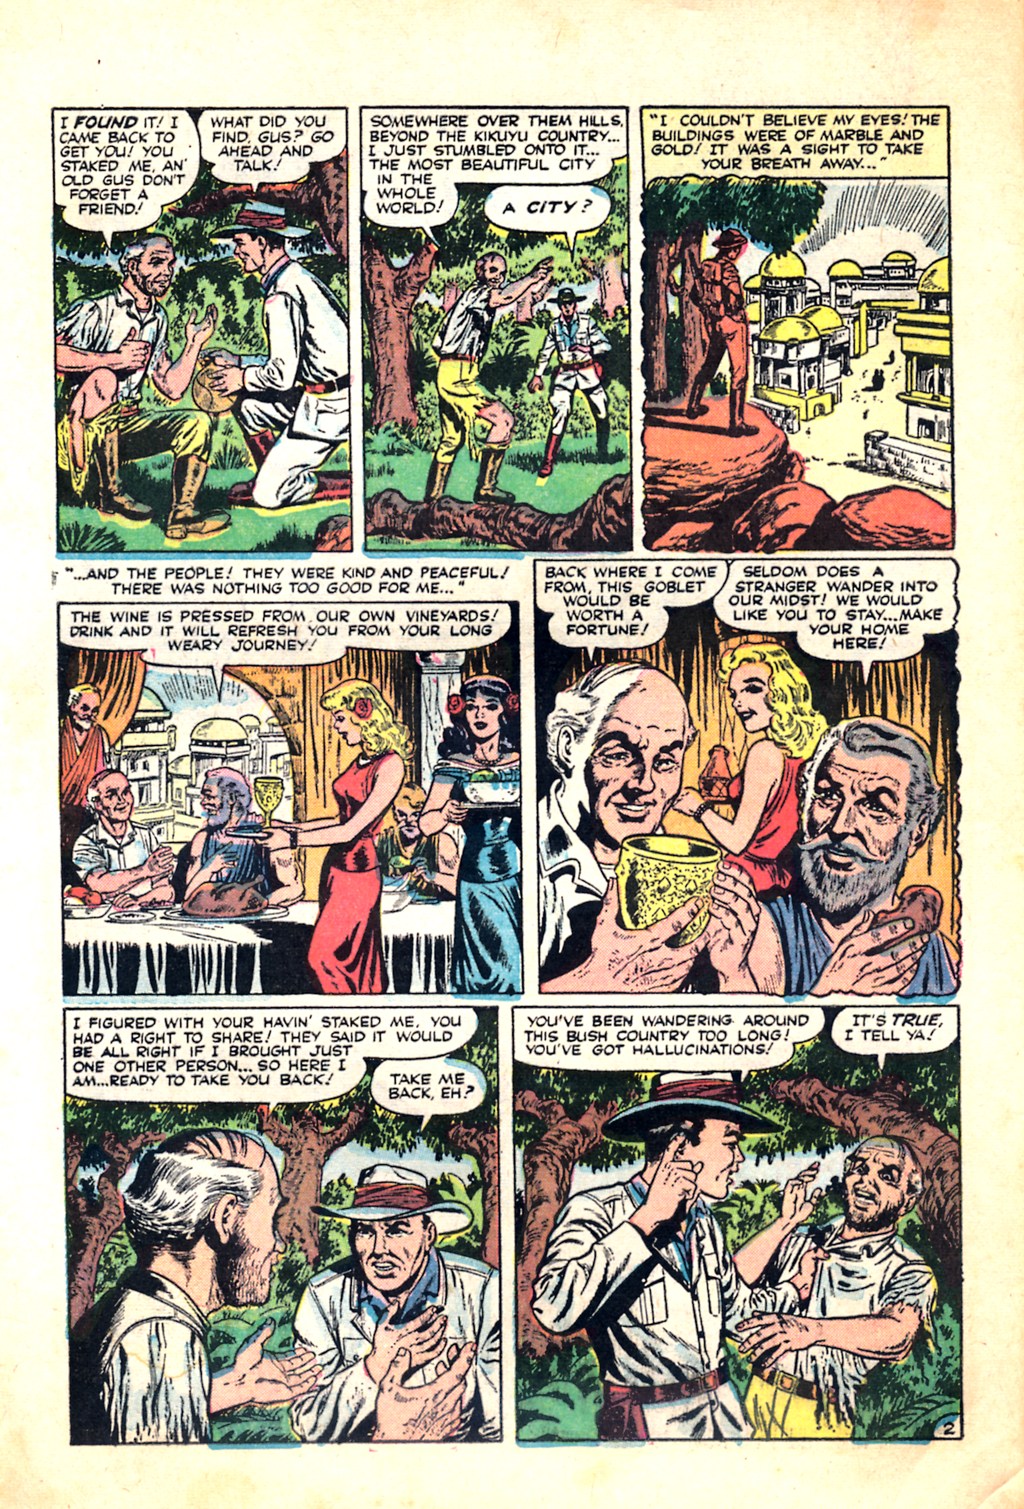 Marvel Tales (1949) 149 Page 3